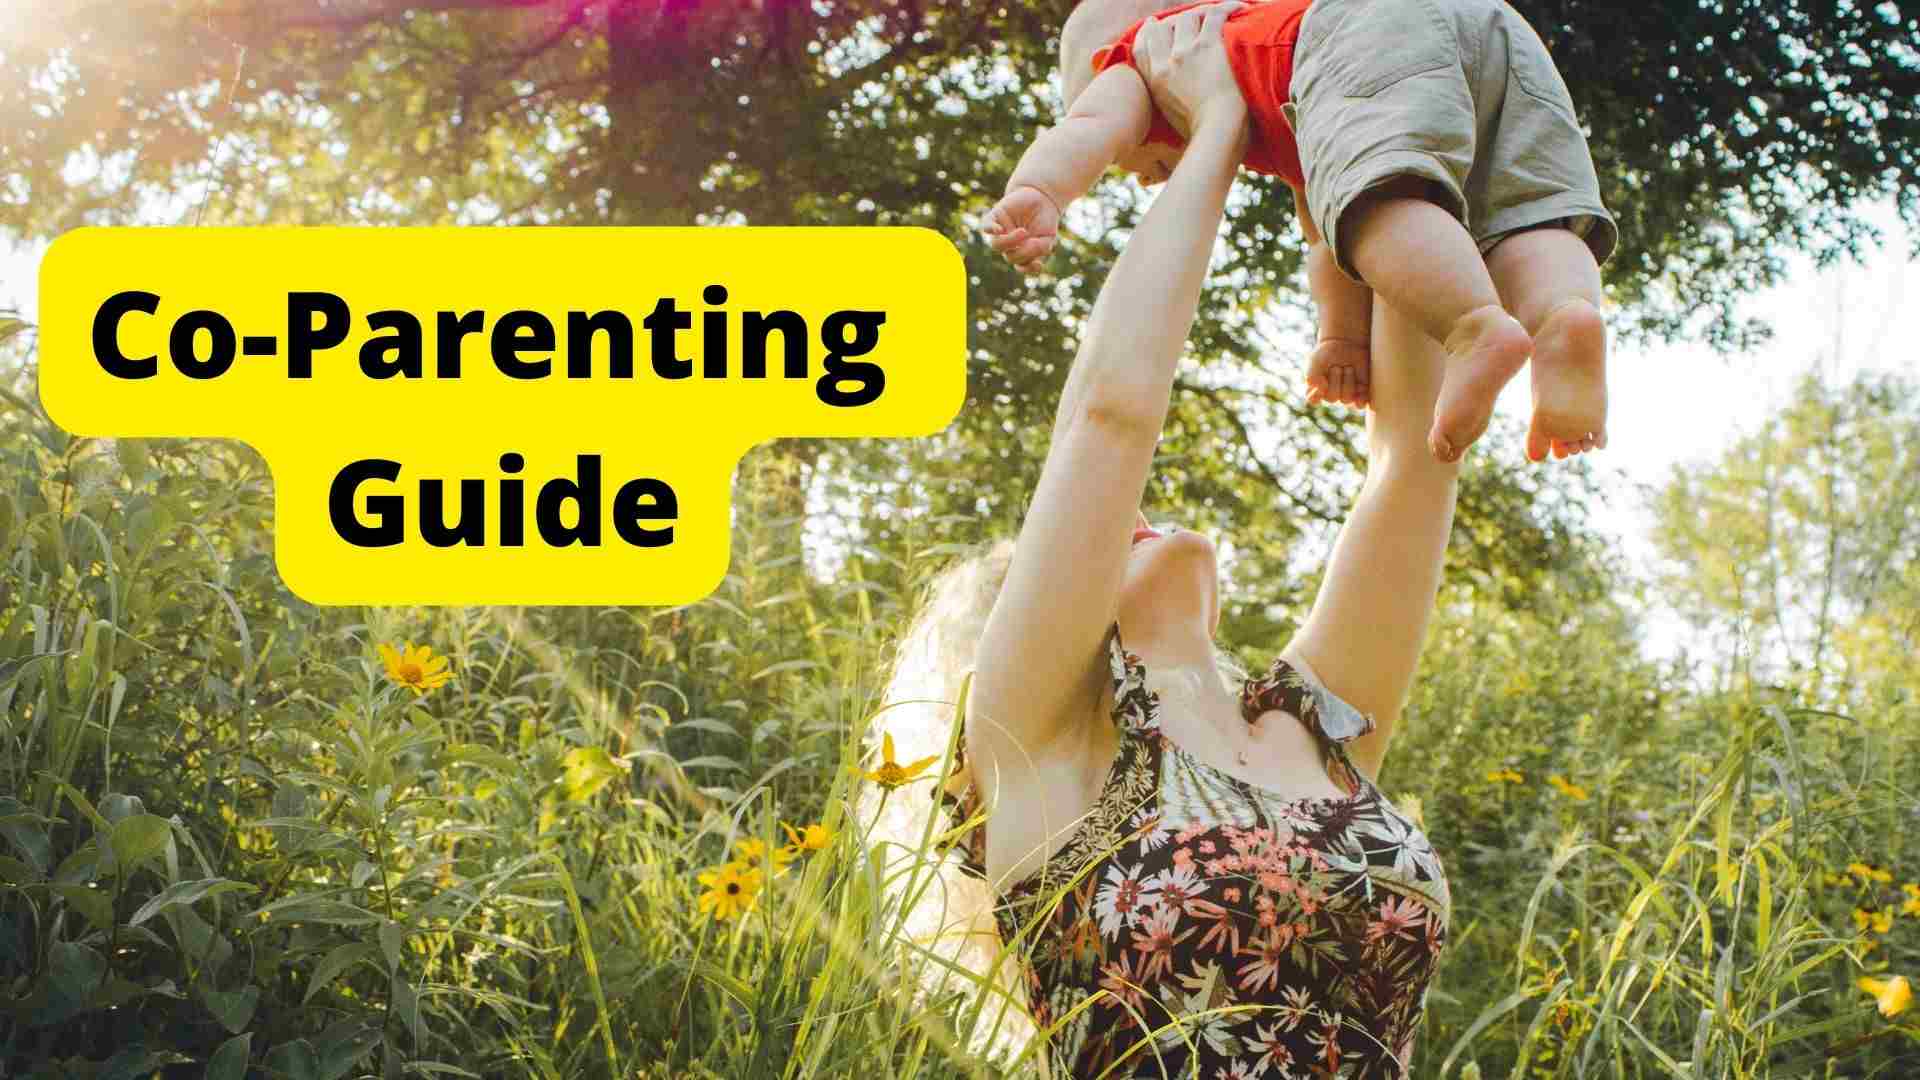 Co Parenting Guide wallpaper and images